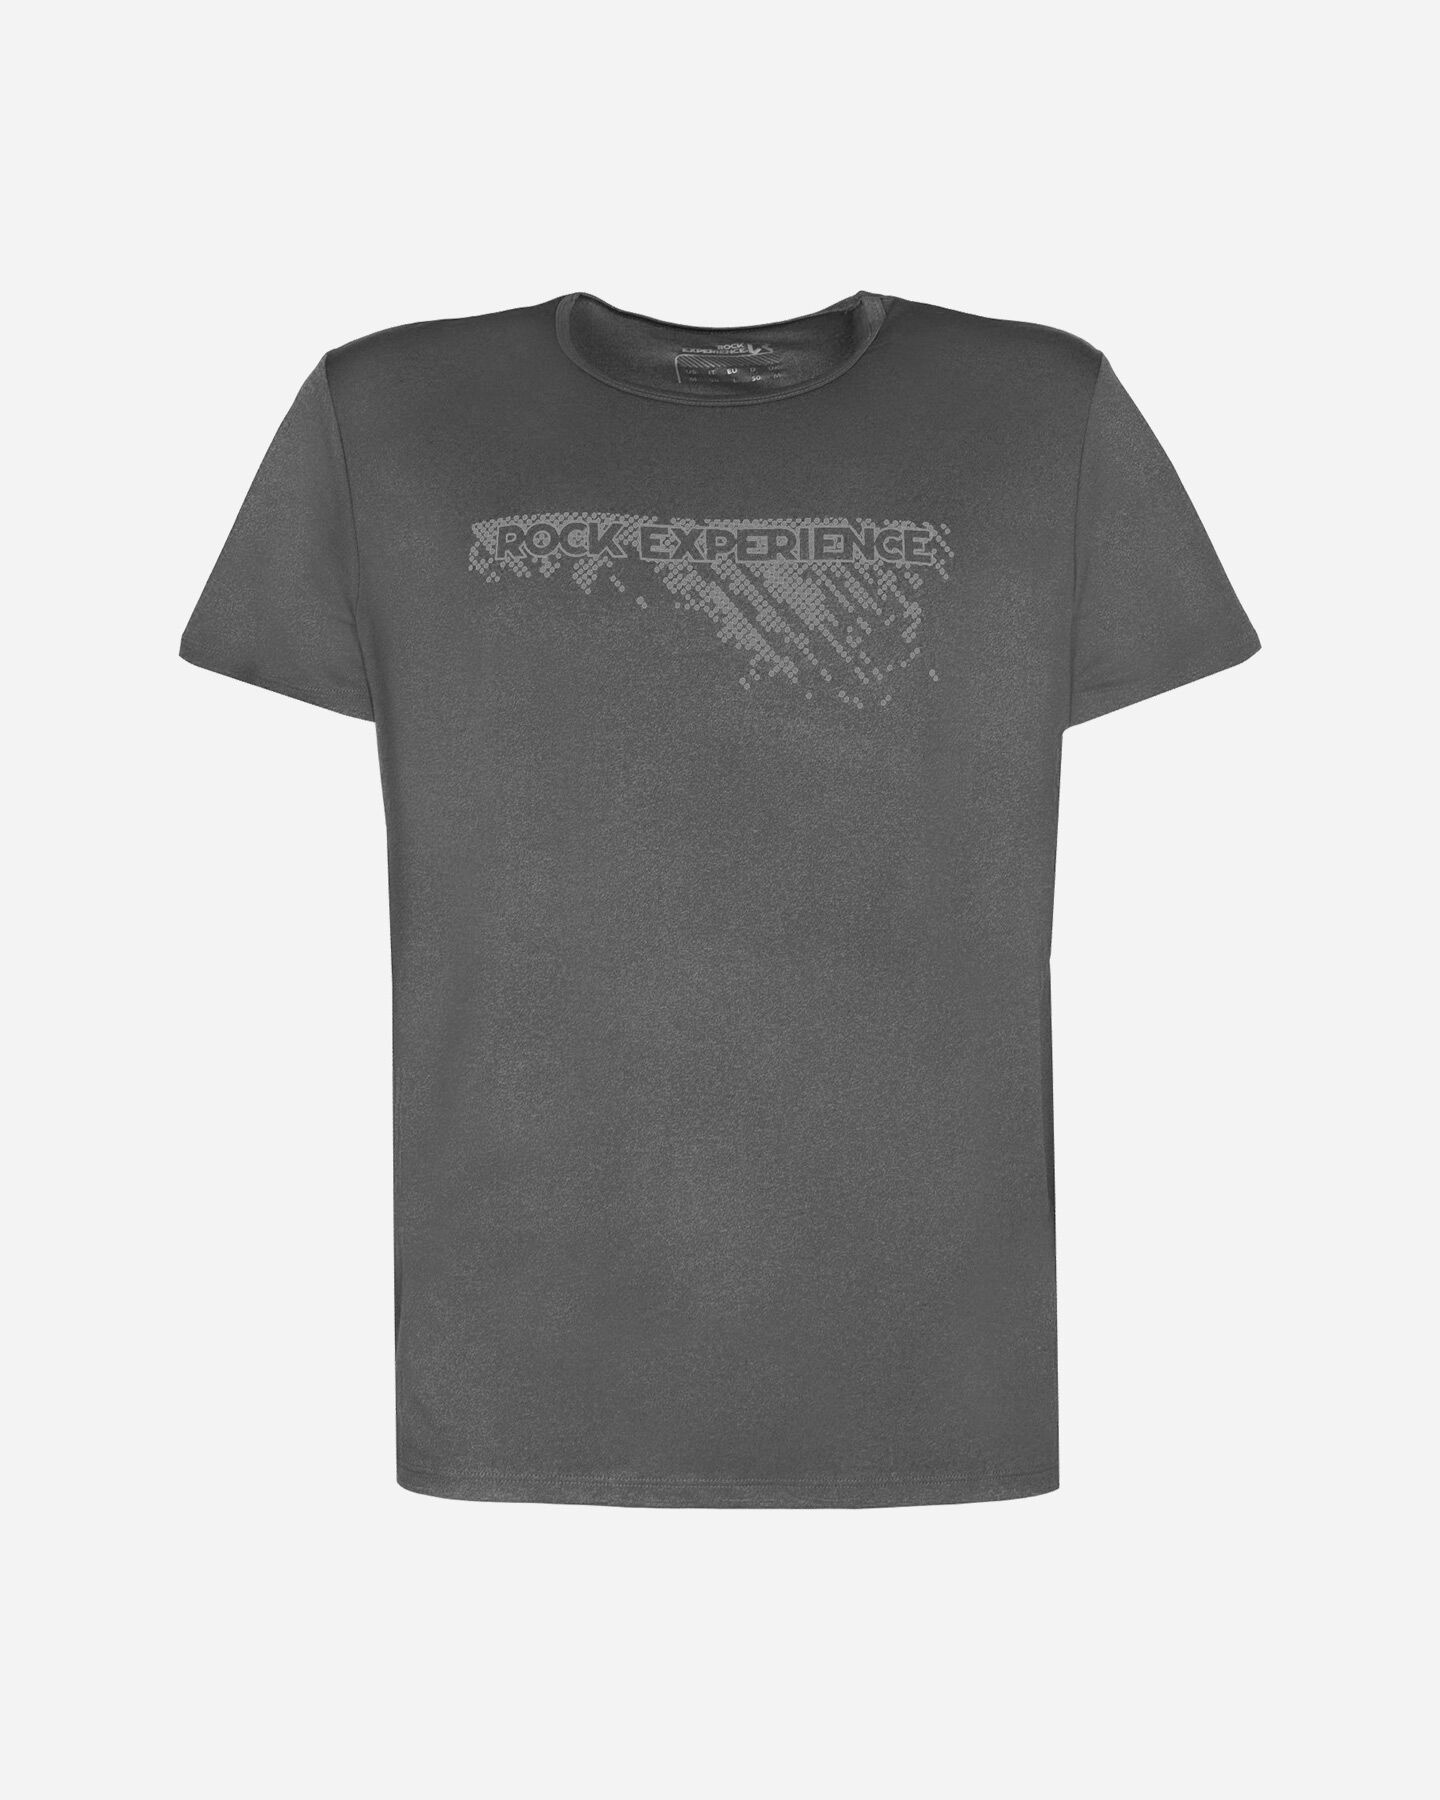  T-Shirt ROCK EXPERIENCE CHANDLER 3.0 M S4130479|O217|S scatto 0